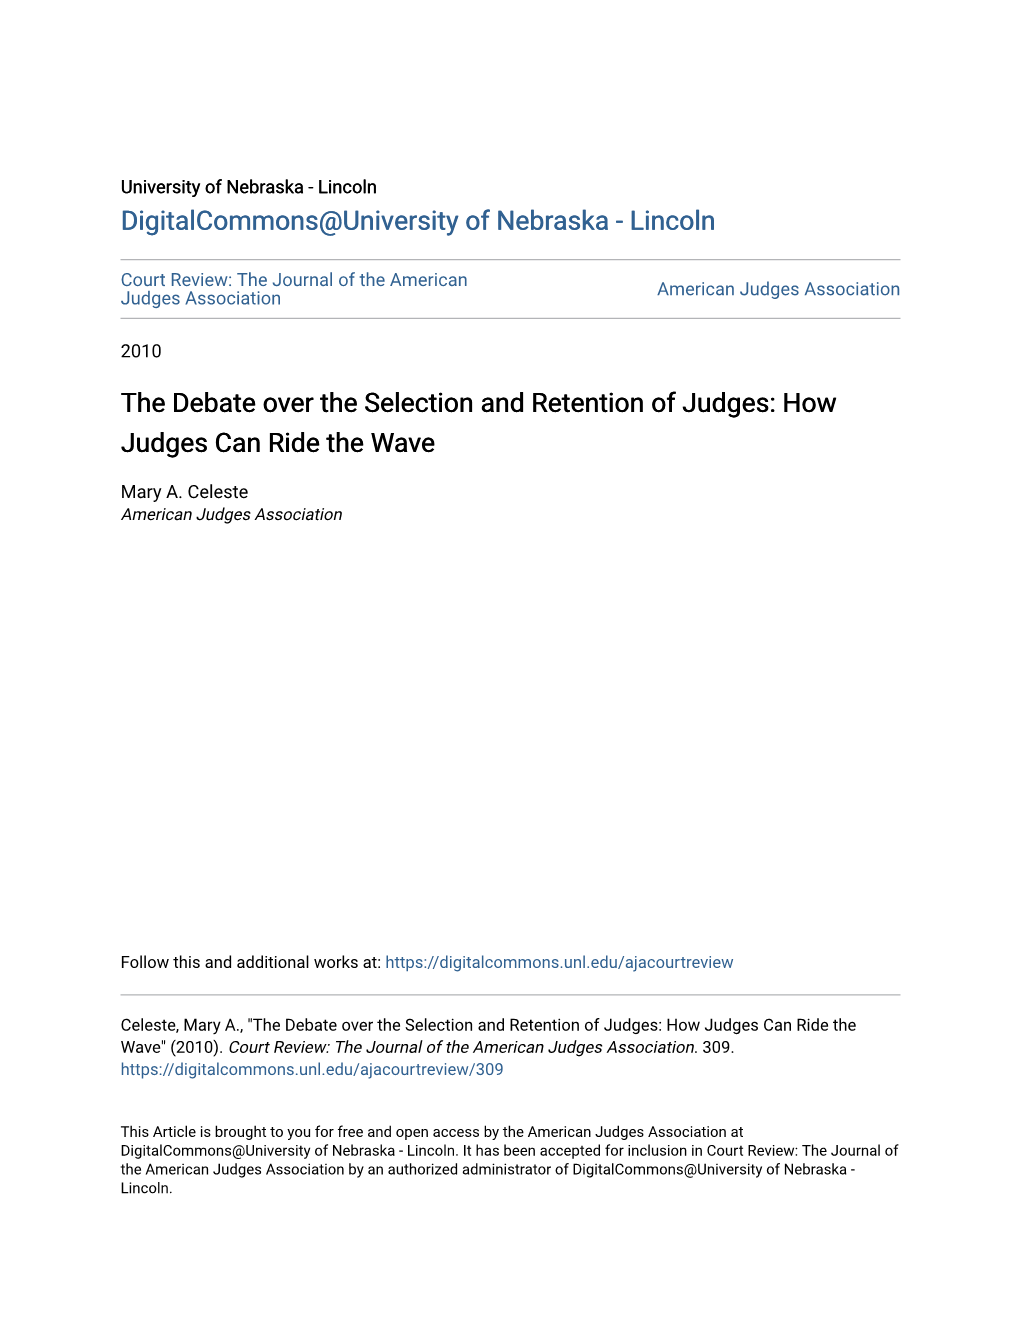 The Debate Over the Selection and Retention of Judges: How Judges Can Ride the Wave